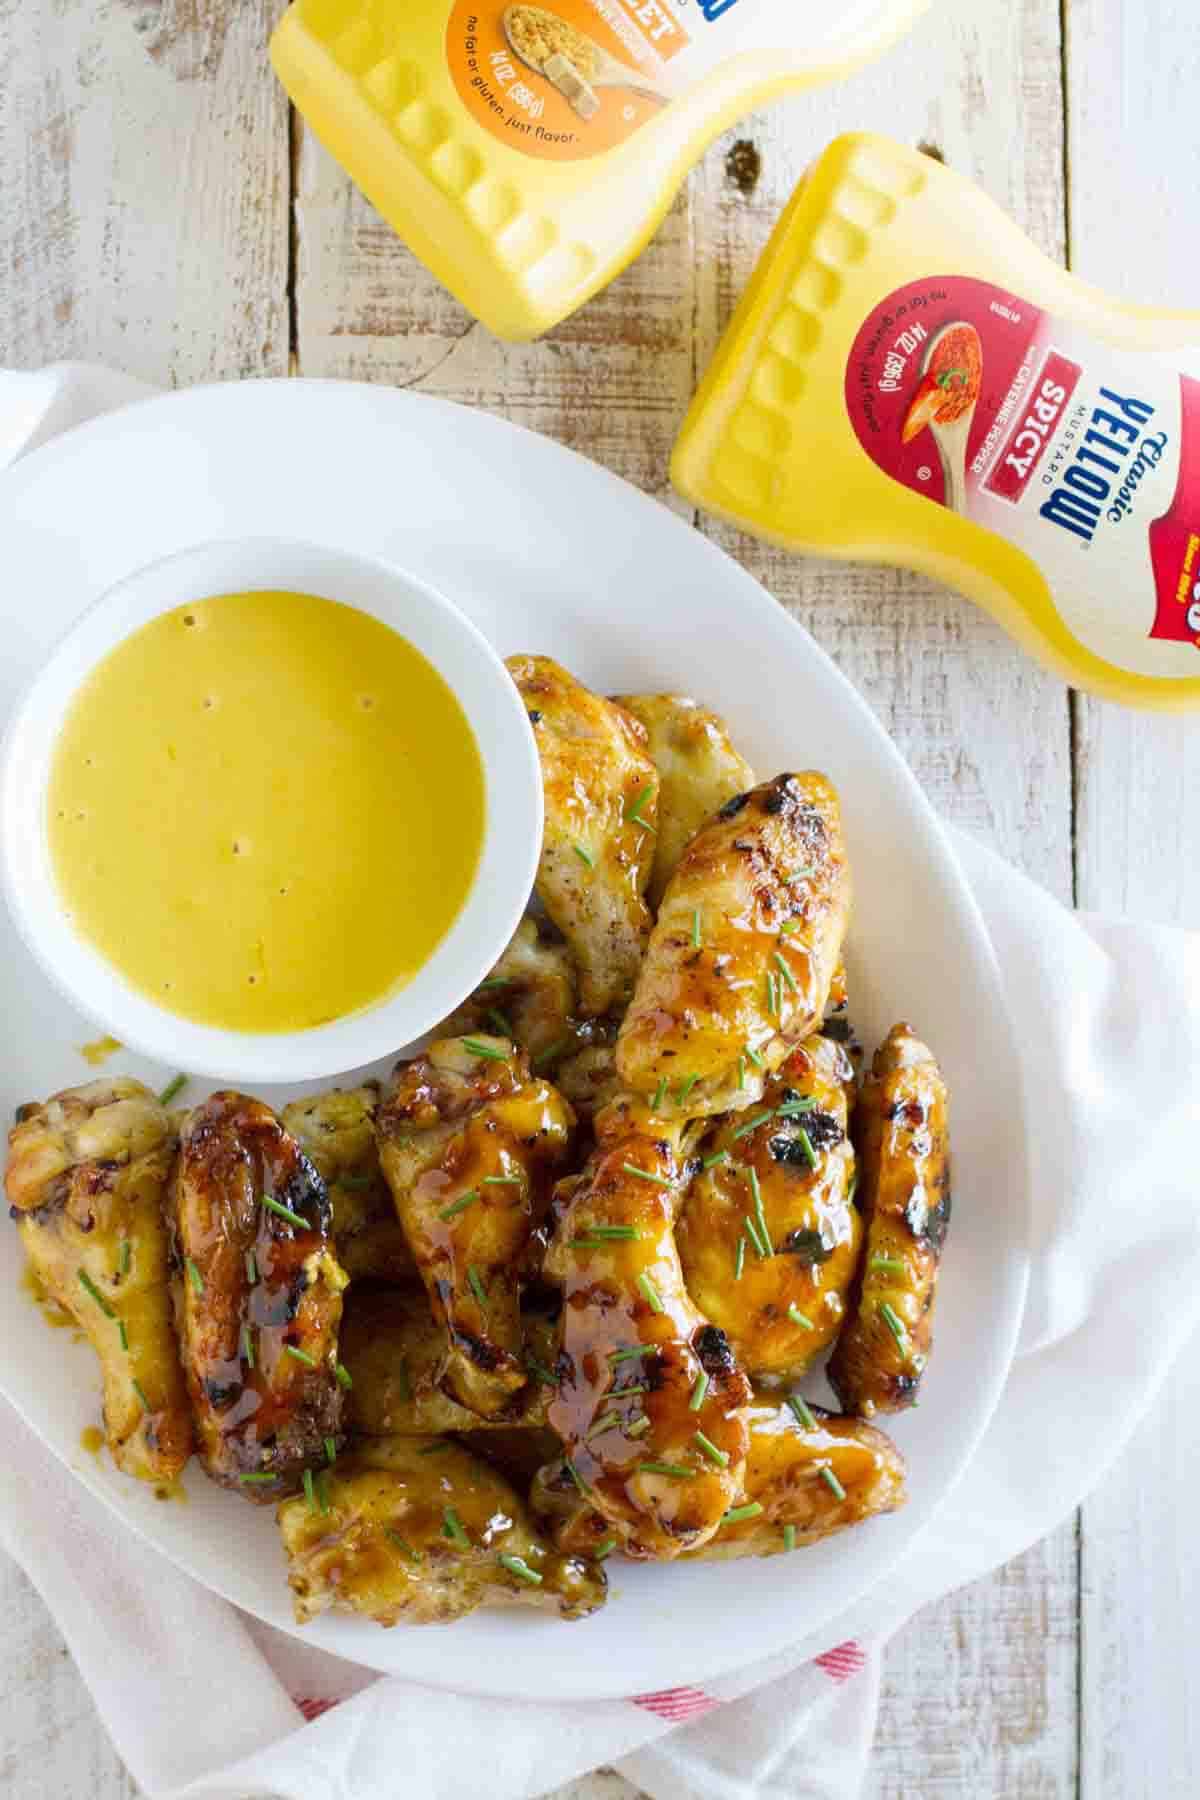 Maple Mustard Grilled Chicken Wings with mustard sauce for dipping.